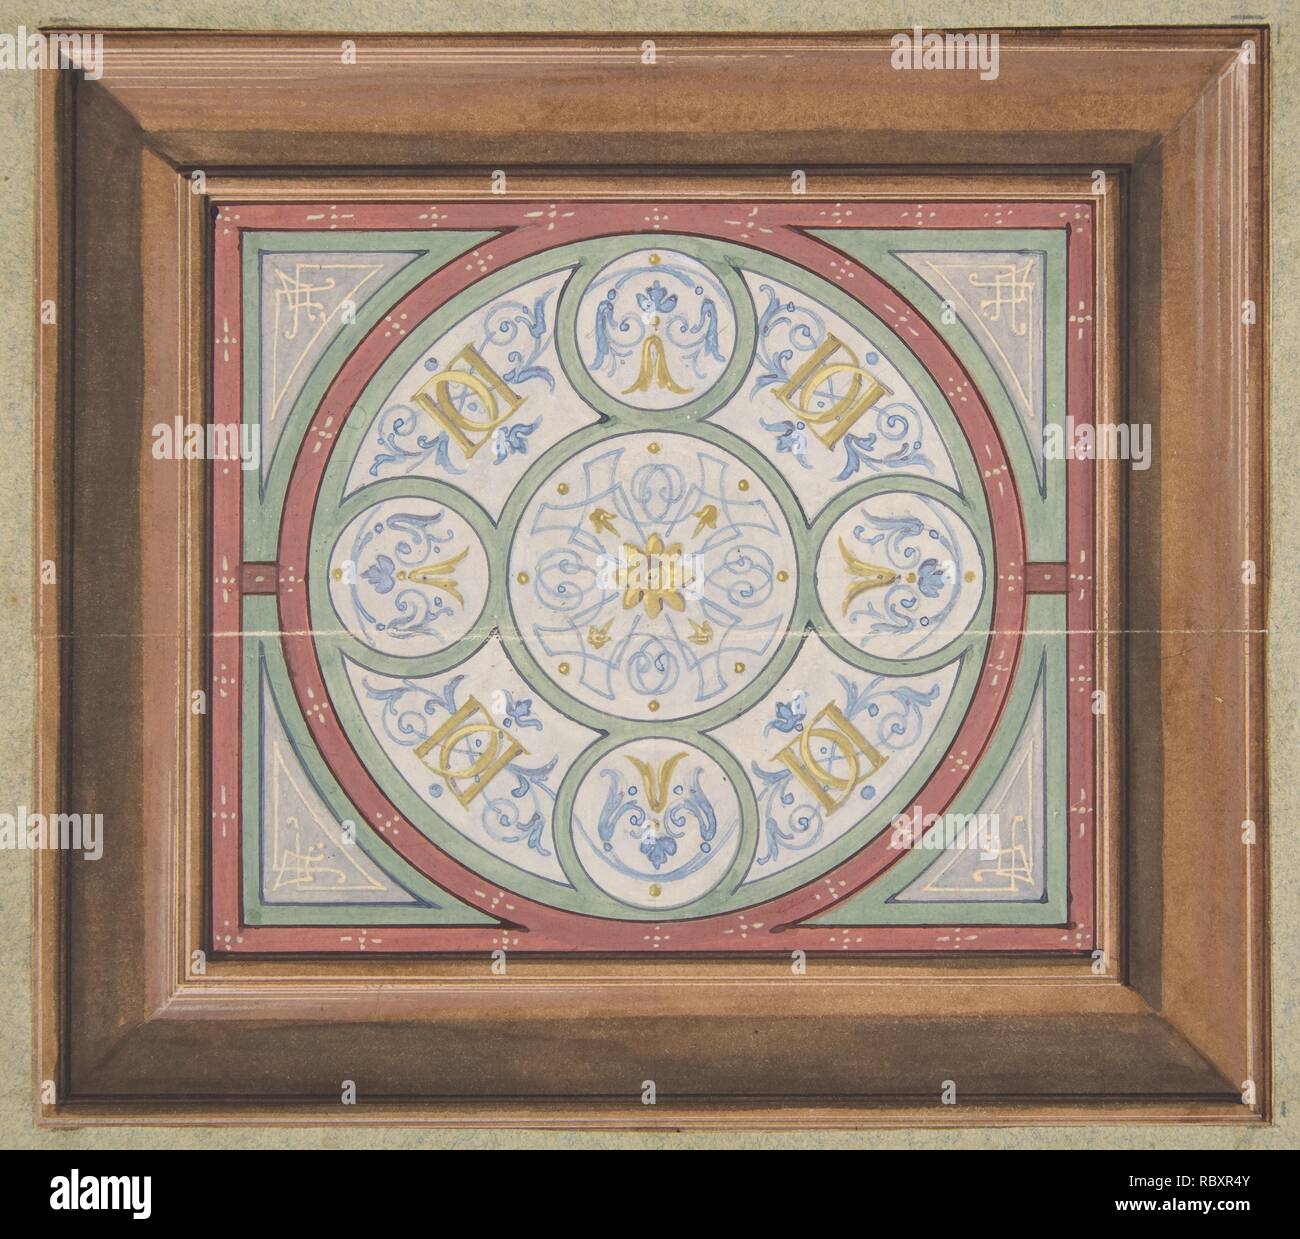 Design for painted decoration of a ceiling incorporating interwined initials DD Jules-Edmond-Charles Lachaise (French, died 1897).jpg - RBXR4Y Stock Photo